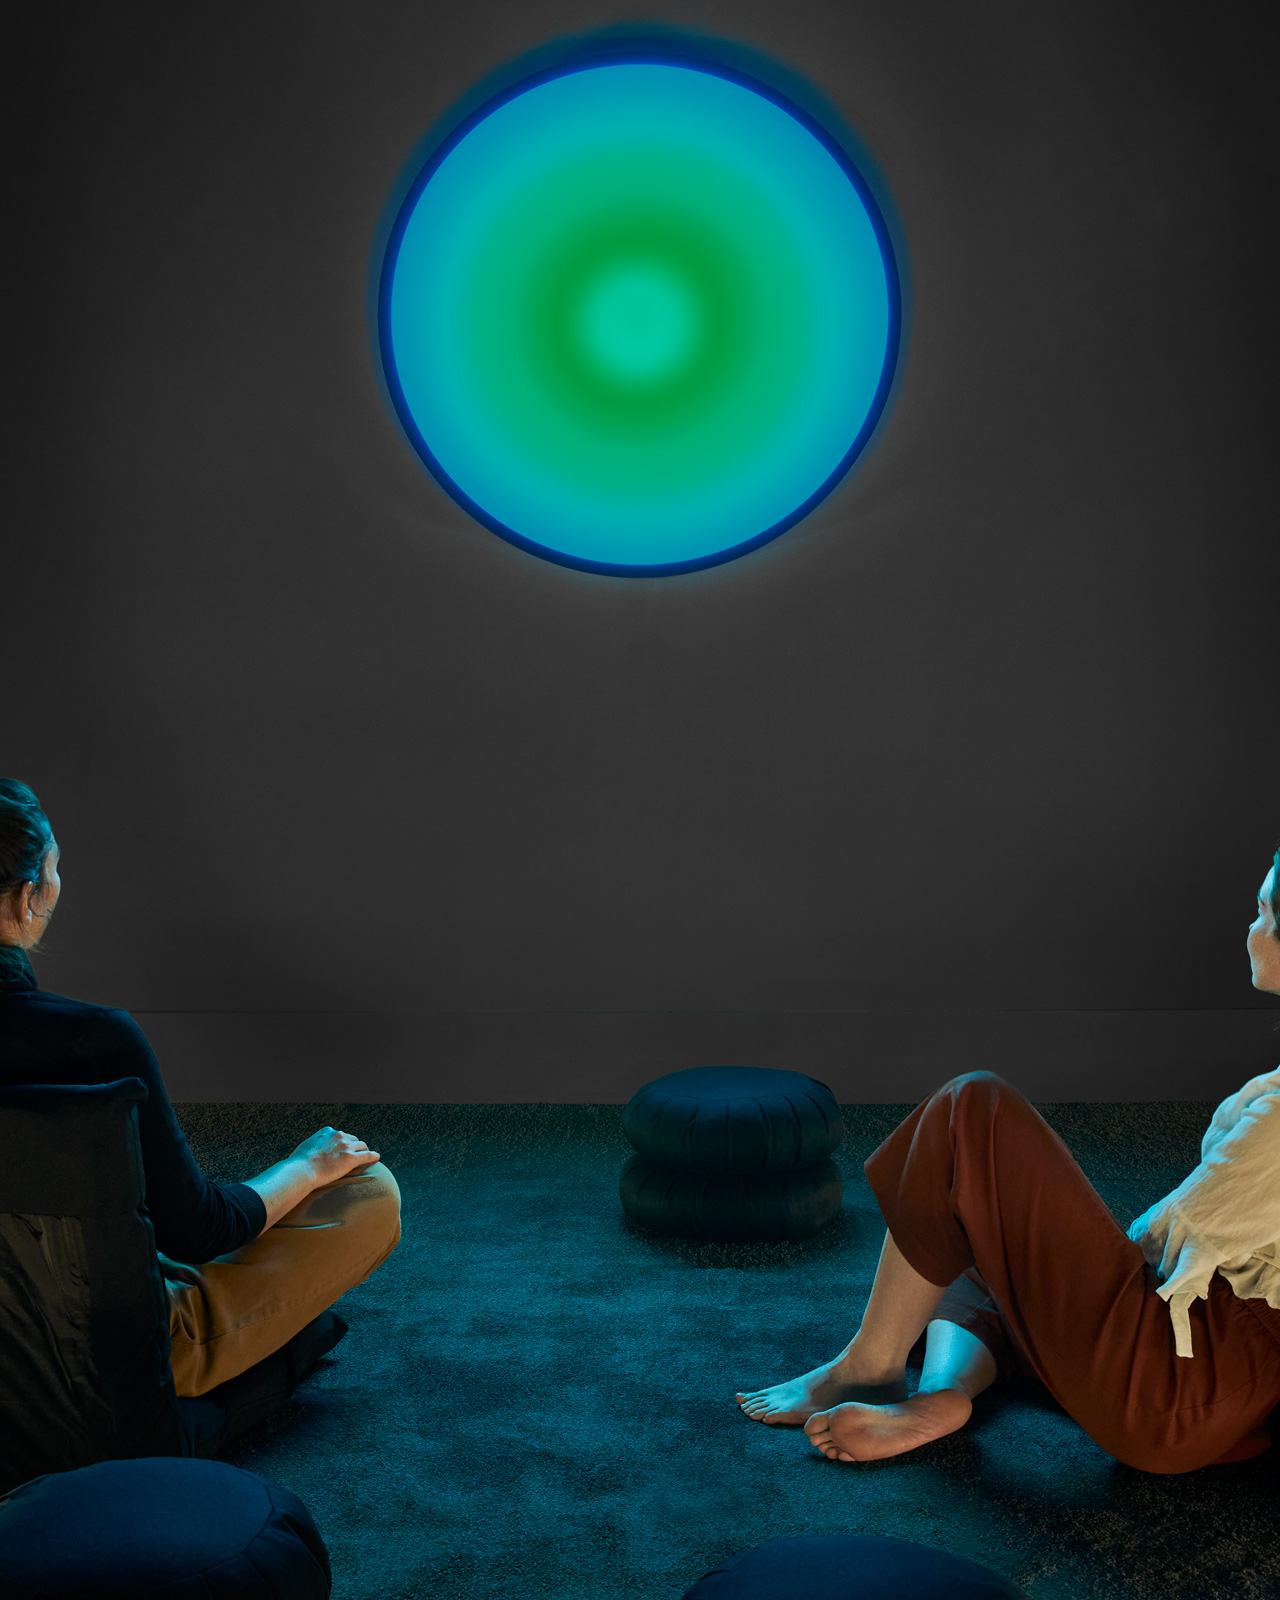 Two people sitting on the floor watching a screen showing a green light